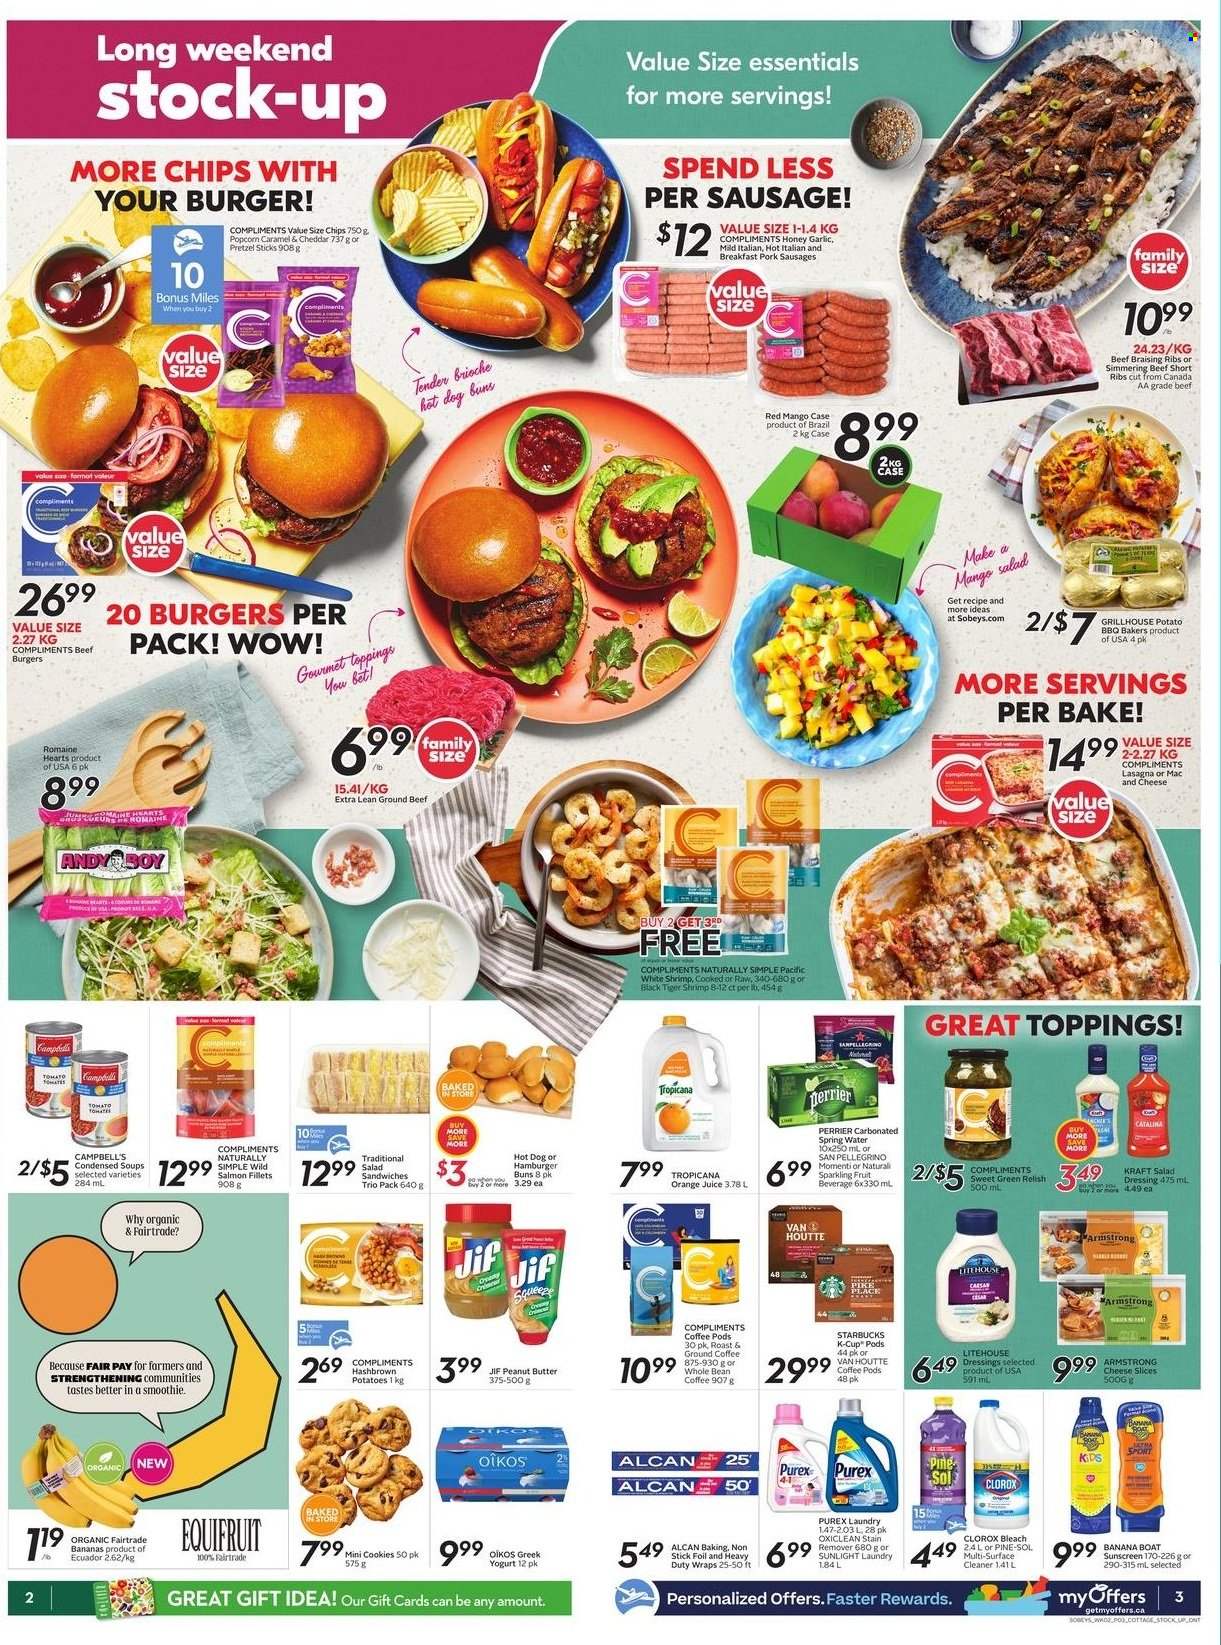 thumbnail - Sobeys Flyer - May 12, 2022 - May 18, 2022 - Sales products - pretzels, buns, burger buns, brioche, wraps, garlic, potatoes, salmon, salmon fillet, shrimps, Campbell's, macaroni & cheese, sandwich, lasagna meal, Kraft®, sausage, sliced cheese, greek yoghurt, yoghurt, Oikos, cookies, chips, popcorn, salad dressing, dressing, honey, peanut butter, Jif, orange juice, juice, Perrier, smoothie, spring water, San Pellegrino, coffee pods, ground coffee, coffee capsules, Starbucks, K-Cups, beef meat, ground beef, surface cleaner, cleaner, bleach, stain remover, Clorox, Pine-Sol, OxiClean, Sunlight, Purex, Bakers. Page 3.